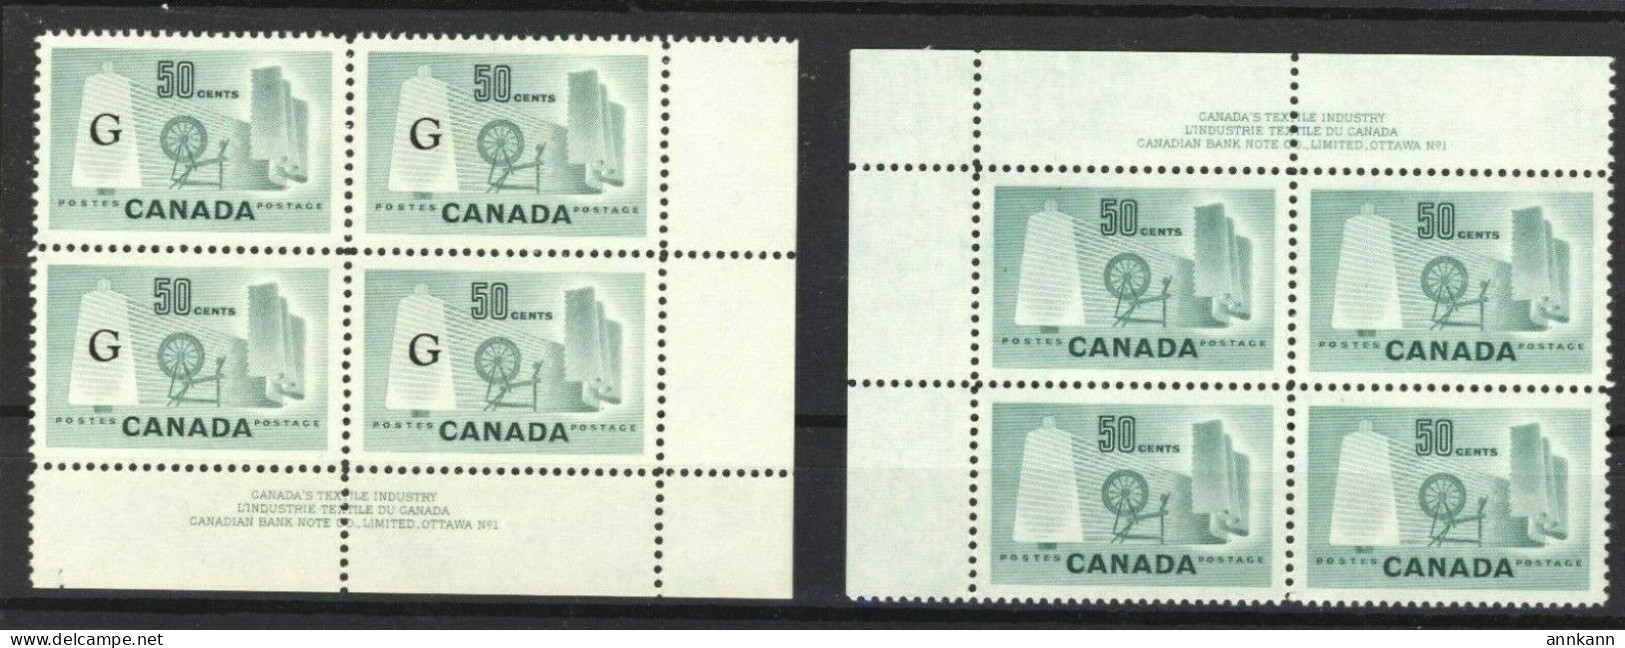 2x Canada MNH VF PL. Blk. #1 Textile Ind. No 334 & #O38 OP G Cat. Value = $75.00 - Sovraccarichi